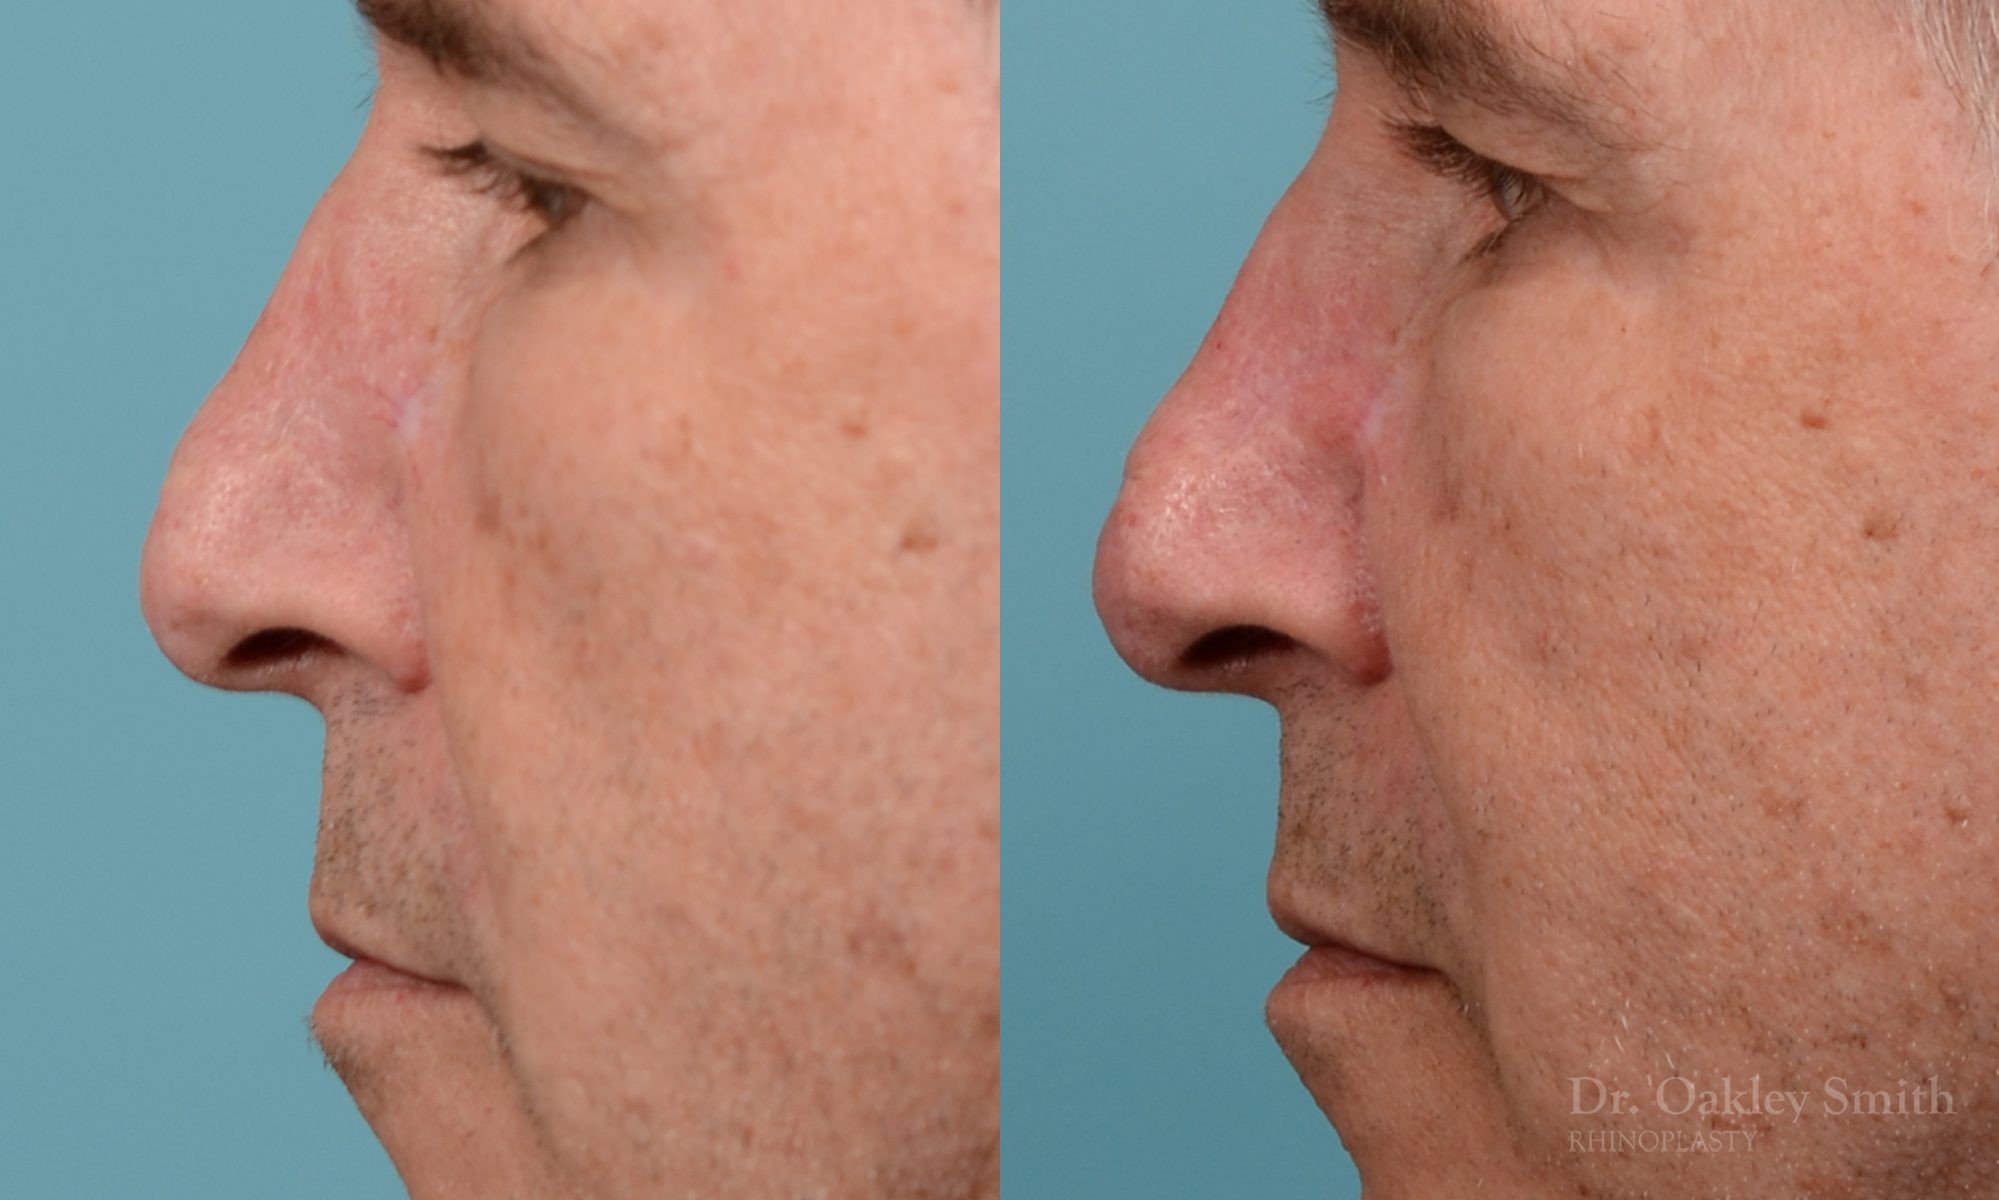 scar removal from previous surgery